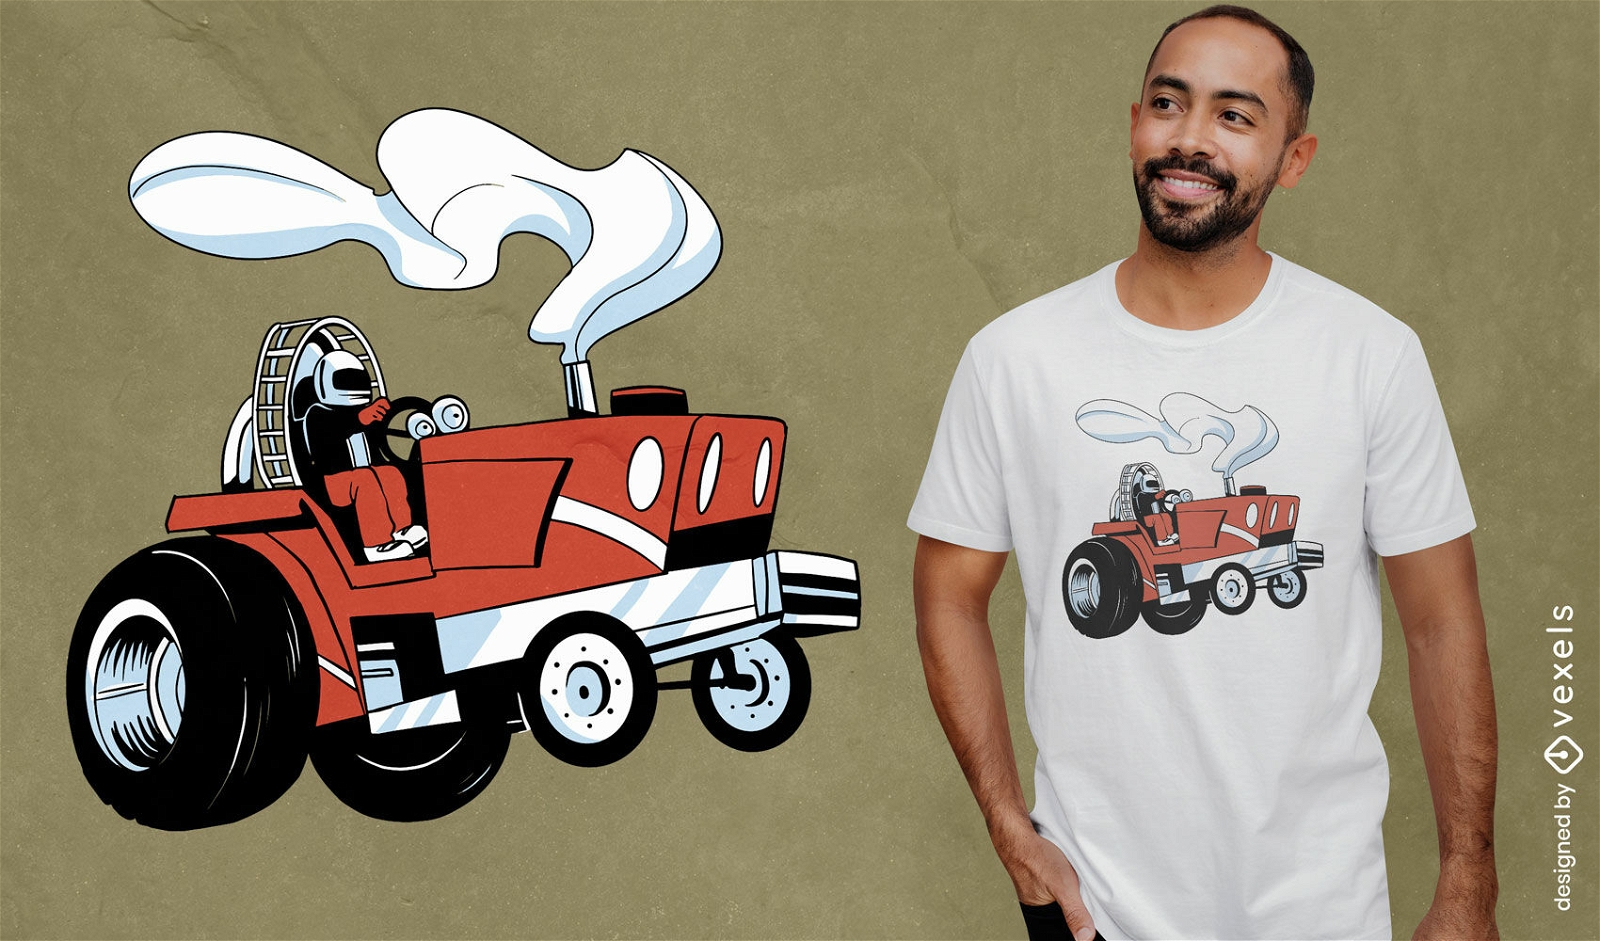 Tractor pull competition t-shirt design